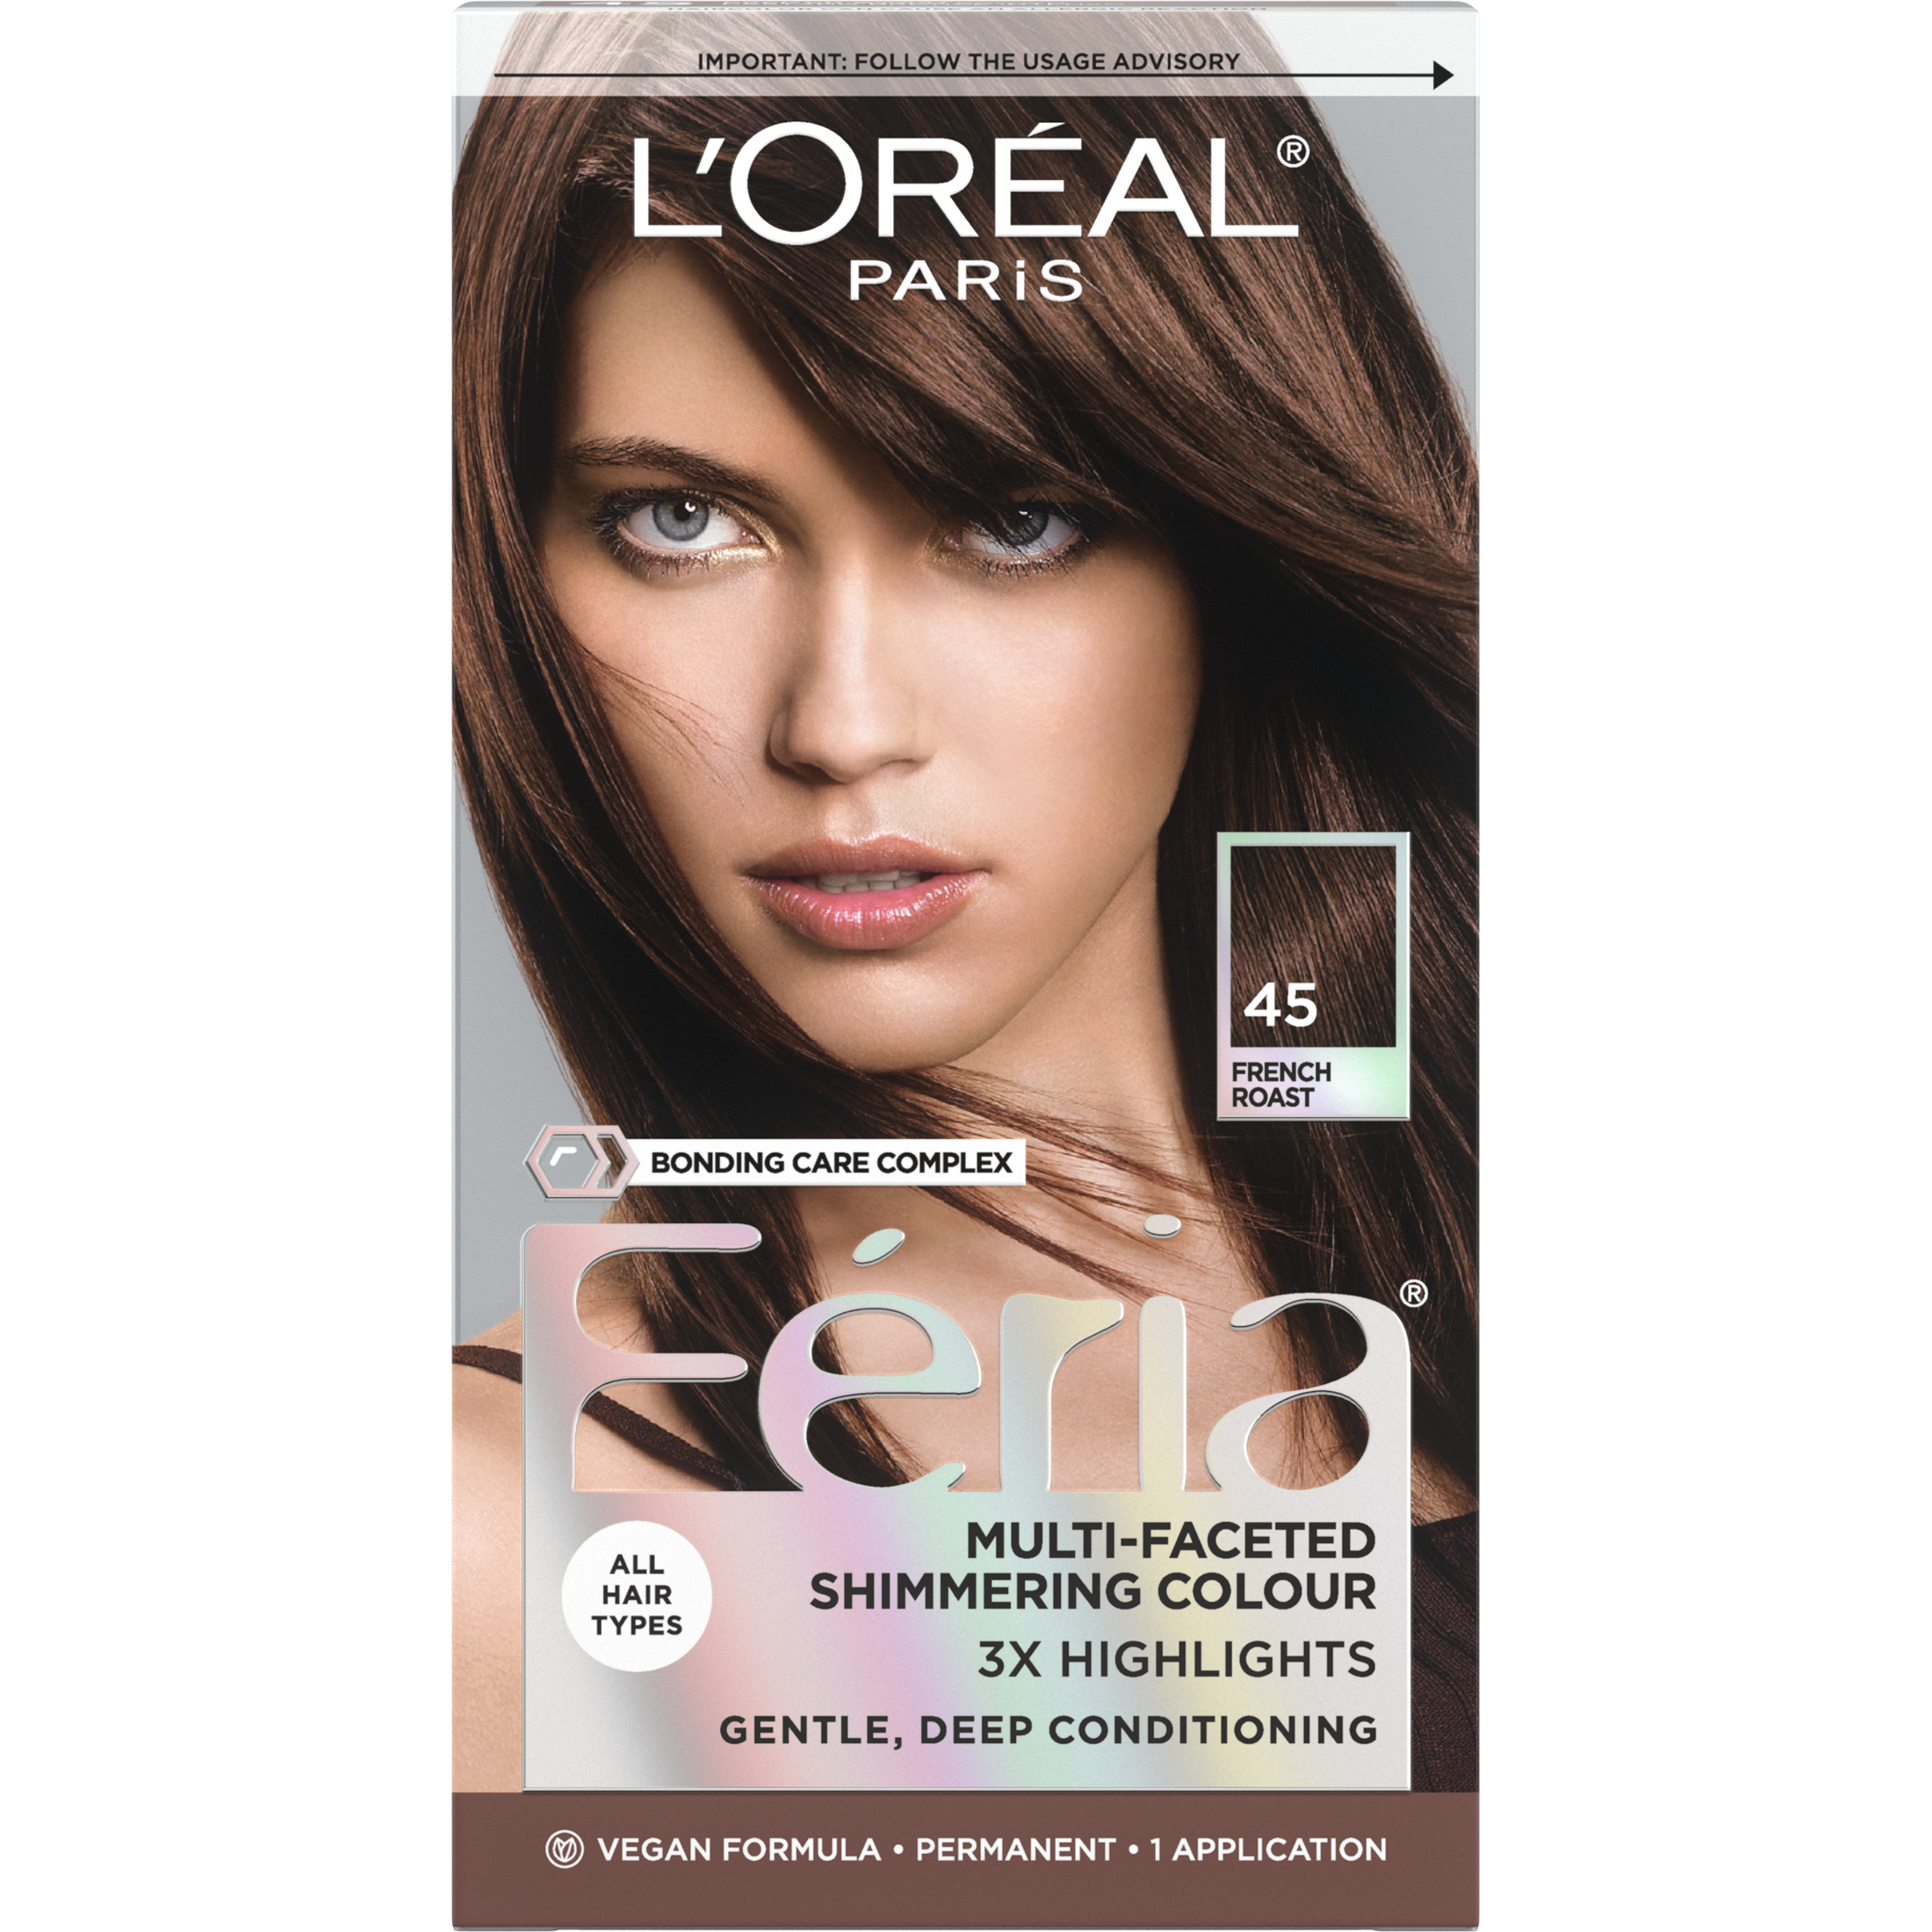 L'Oreal Paris Feria Permanent Hair Color, 45 French Roast Deep Bronzed Brown - image 1 of 9